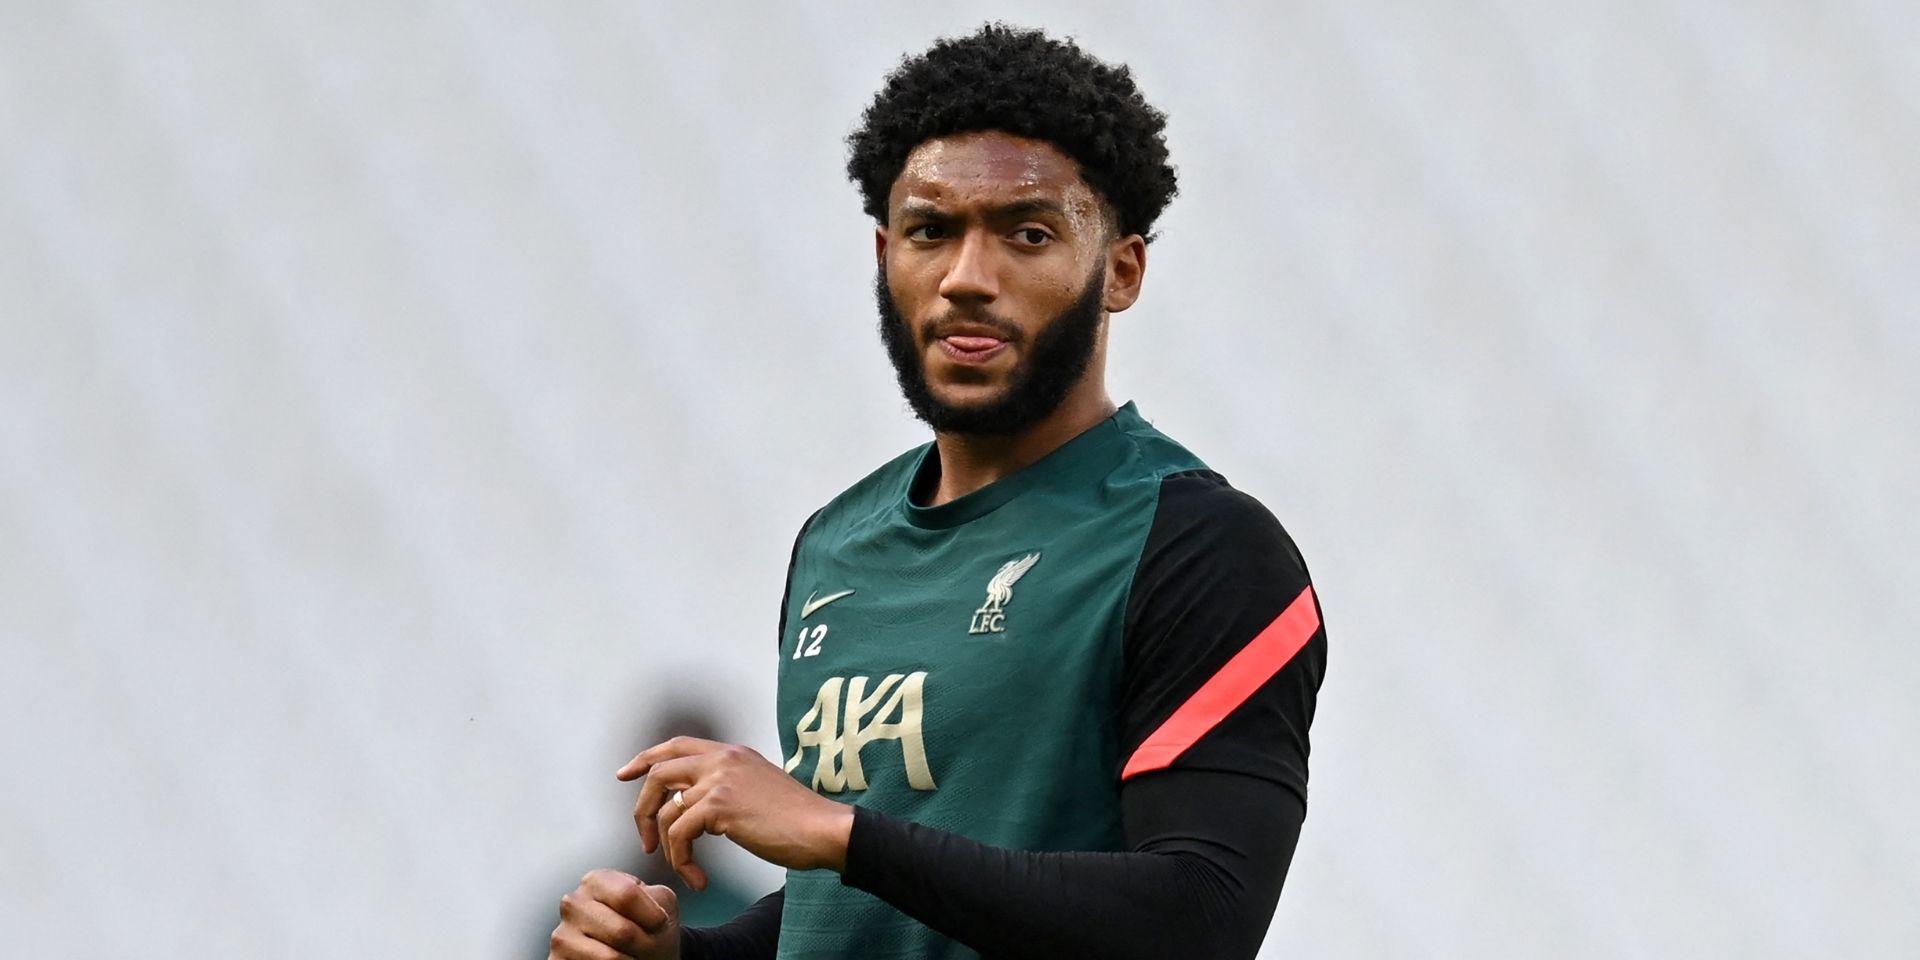 Paul Joyce provides an update on Joe Gomez’s contract situation as ‘talks’ have been held since the start of pre-season